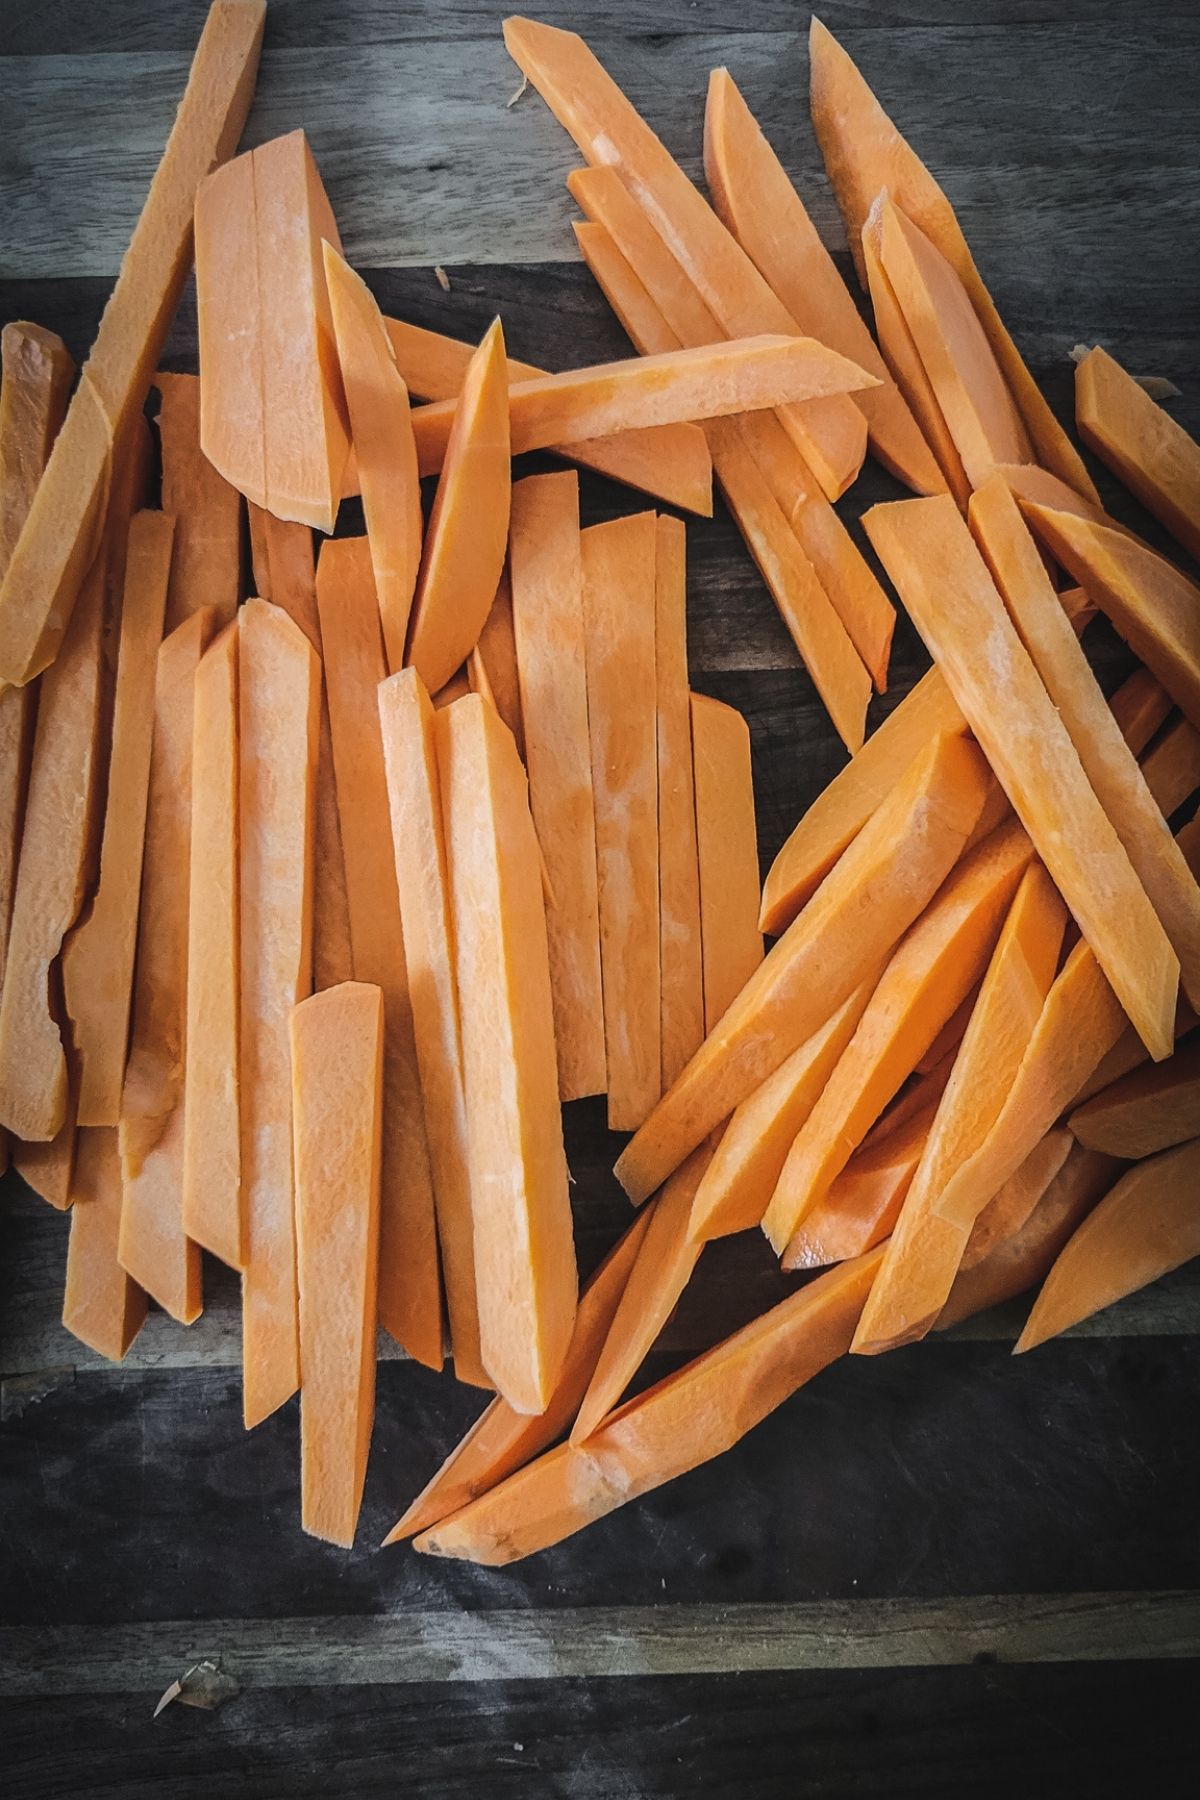 A photo of raw sweet potato fries being soaked in a bowl of water.